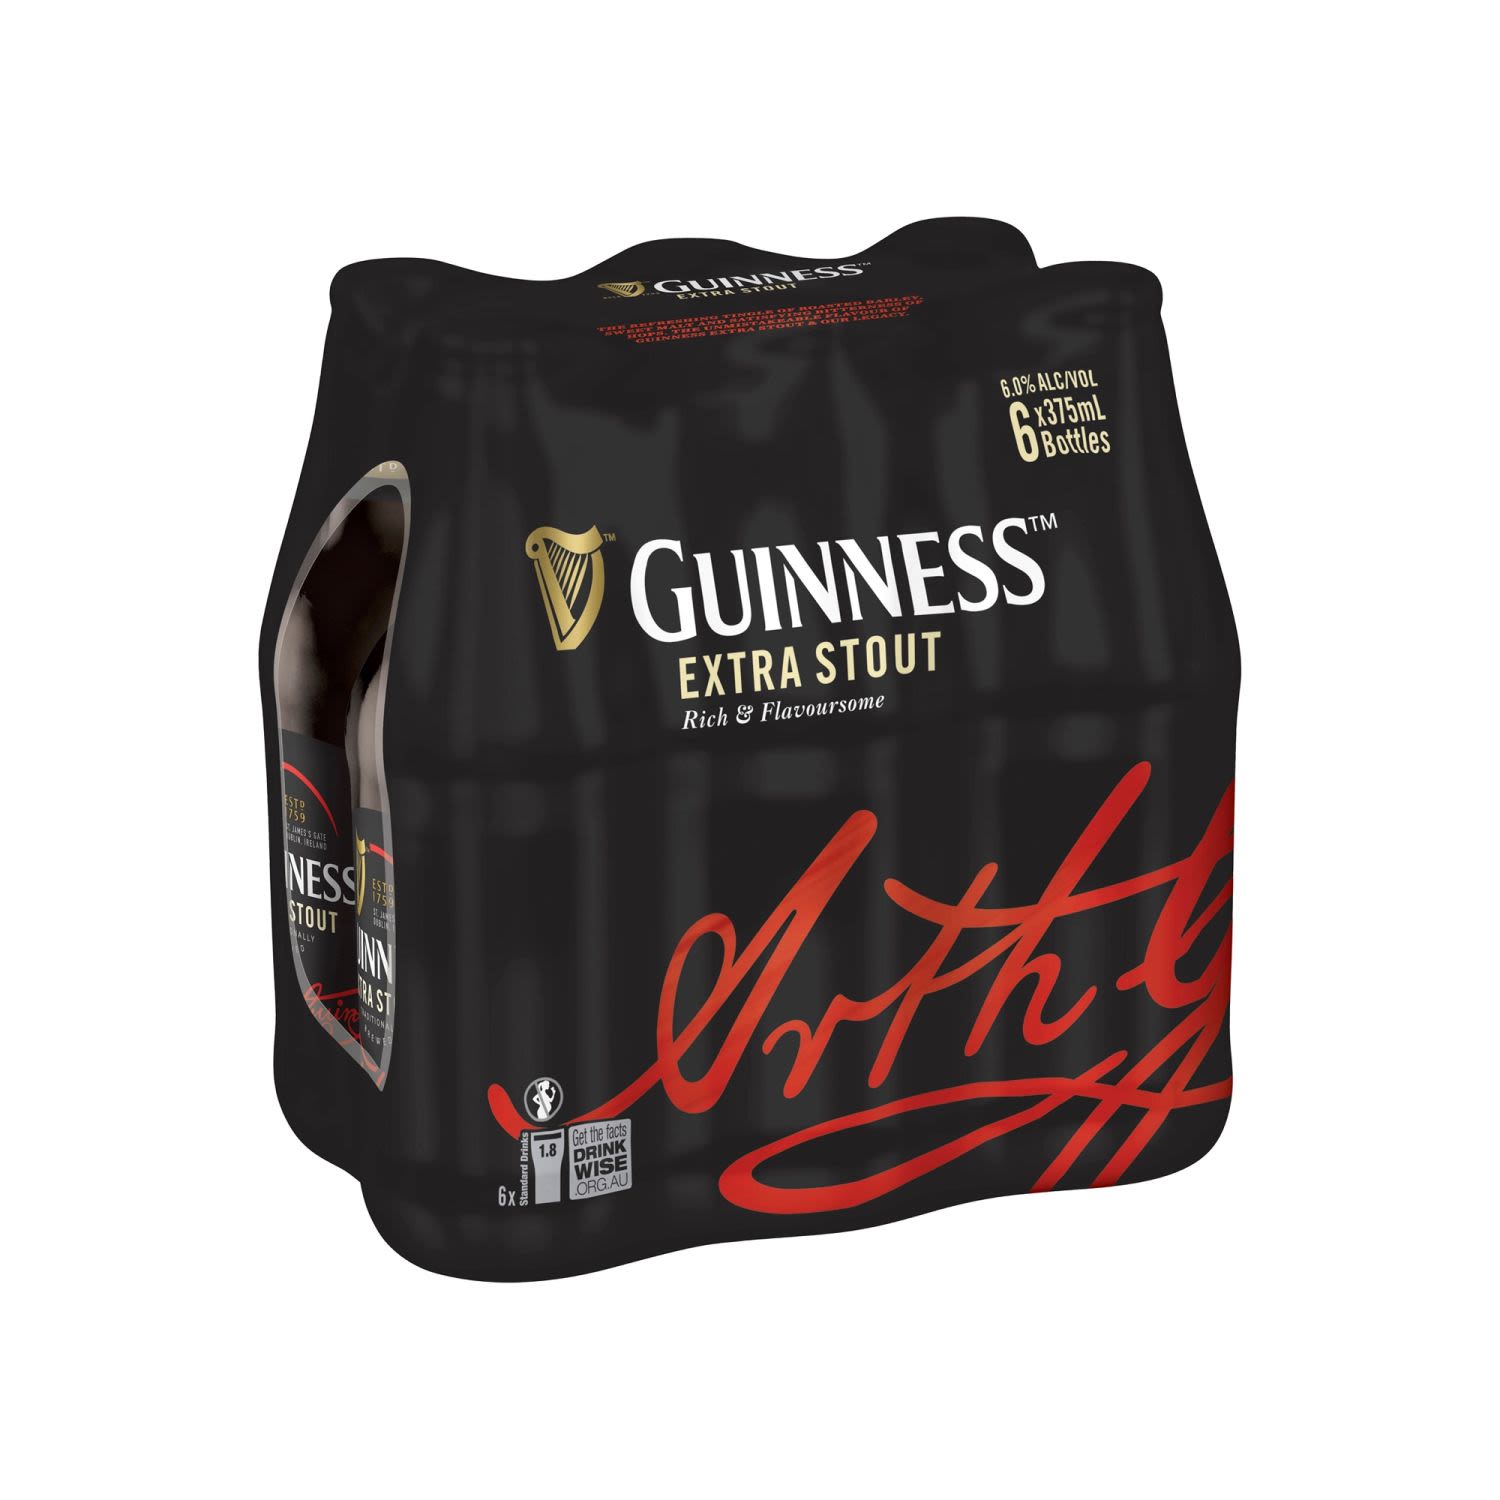 The crisp hint of roasted barley, the fresh breeze of hops. The refreshing bite. The bittersweet reward. Pure beauty; pure Guinness.<br /> <br />Alcohol Volume: 6.00%<br /><br />Pack Format: 6 Pack<br /><br />Standard Drinks: 1.8</br /><br />Pack Type: Bottle<br /><br />Country of Origin: Ireland<br />